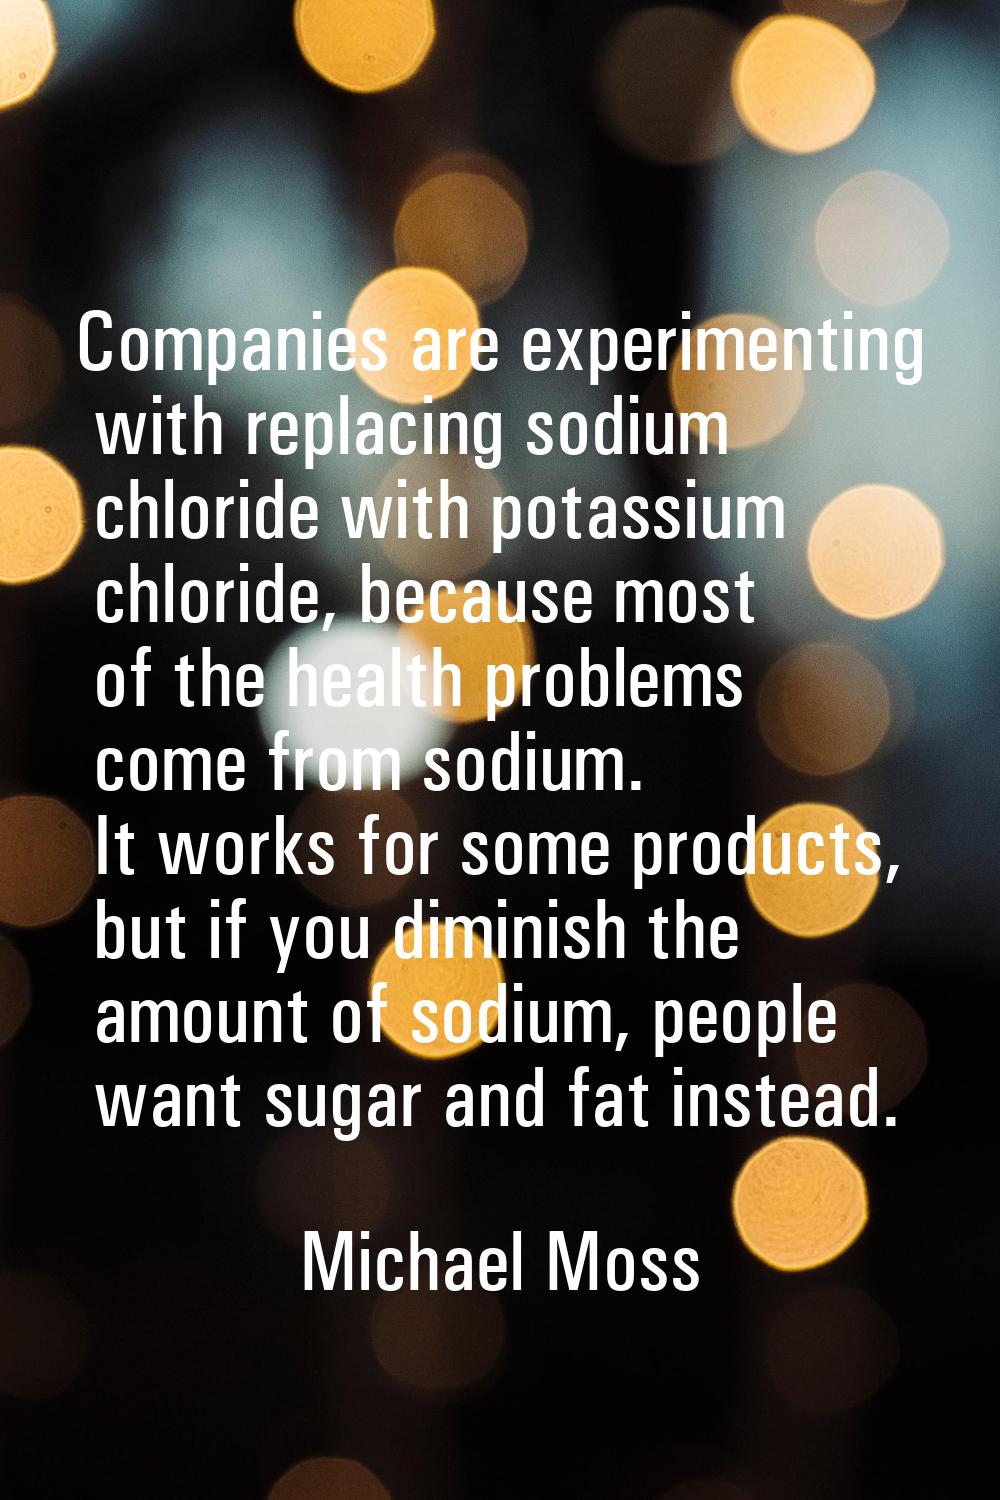 Companies are experimenting with replacing sodium chloride with potassium chloride, because most of